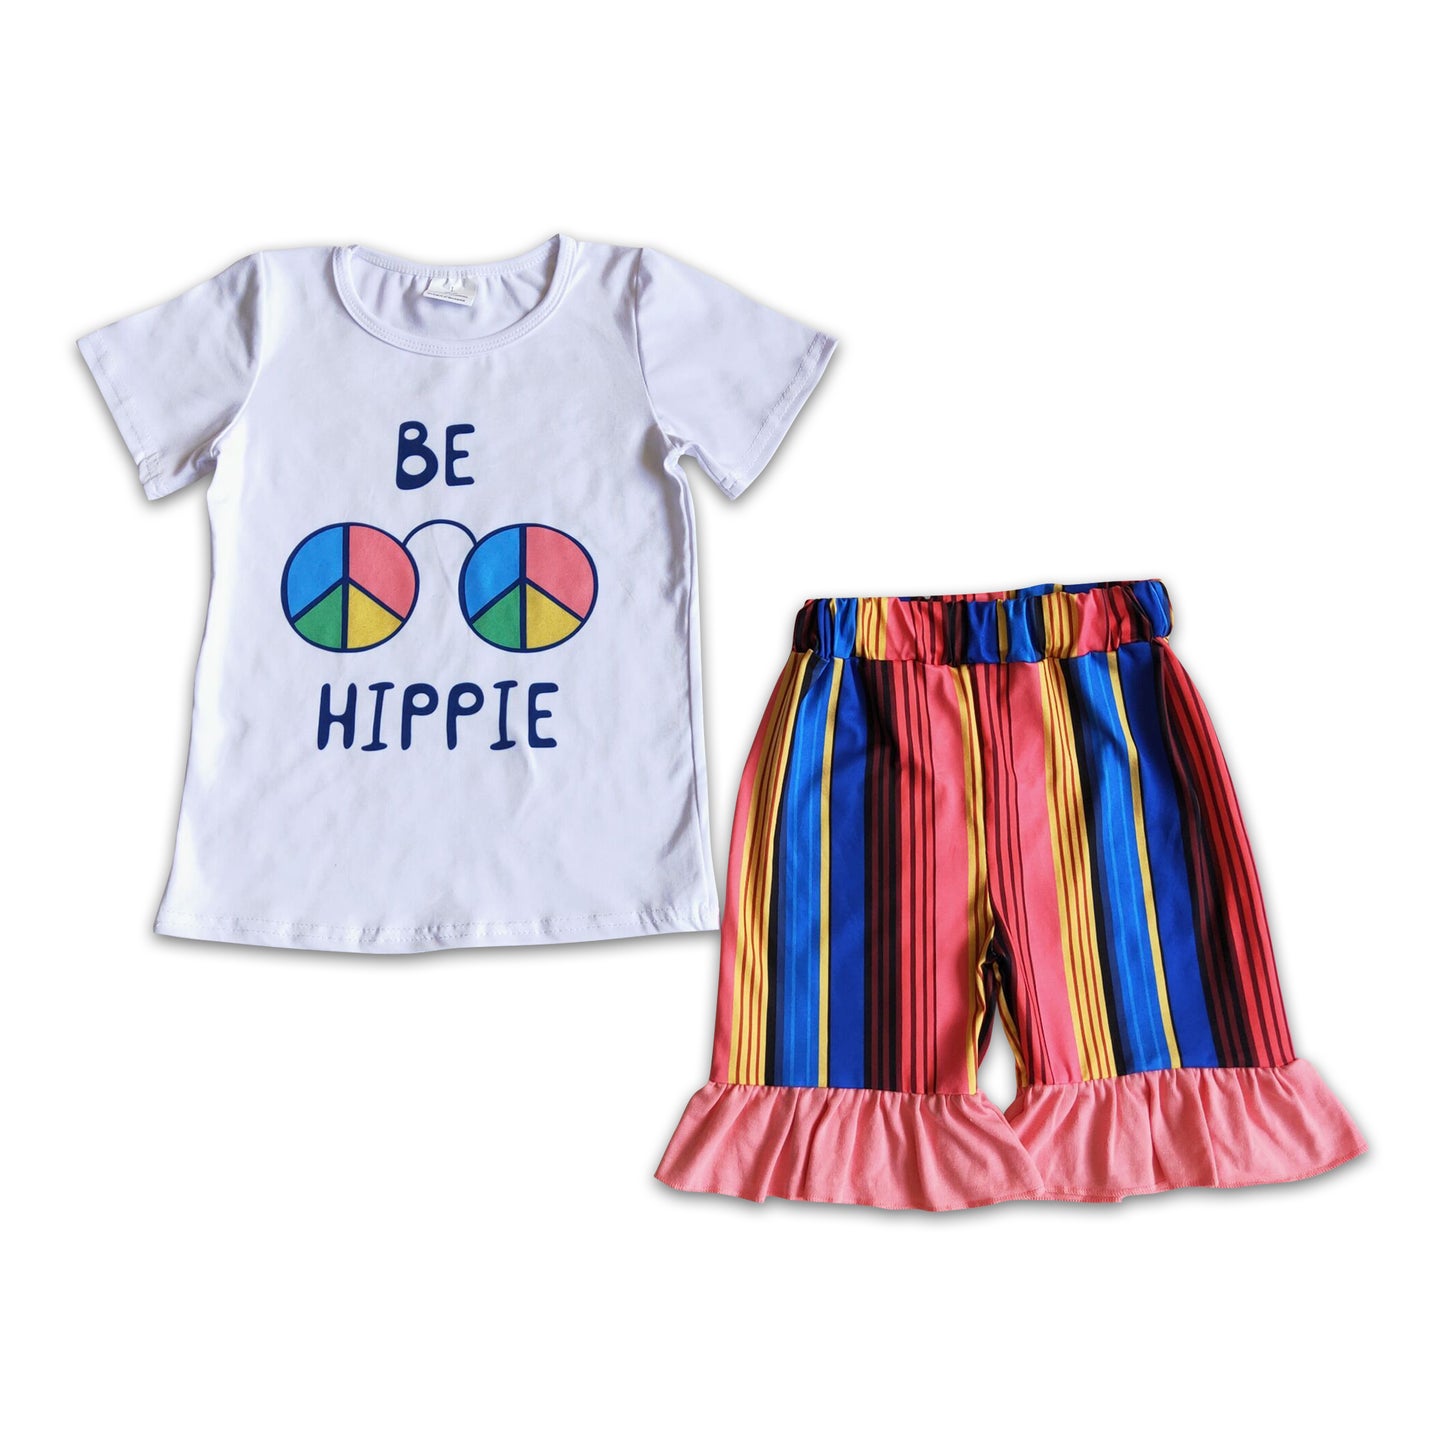 Be Hippie white shirt colorful stripe shorts girls summer clothes